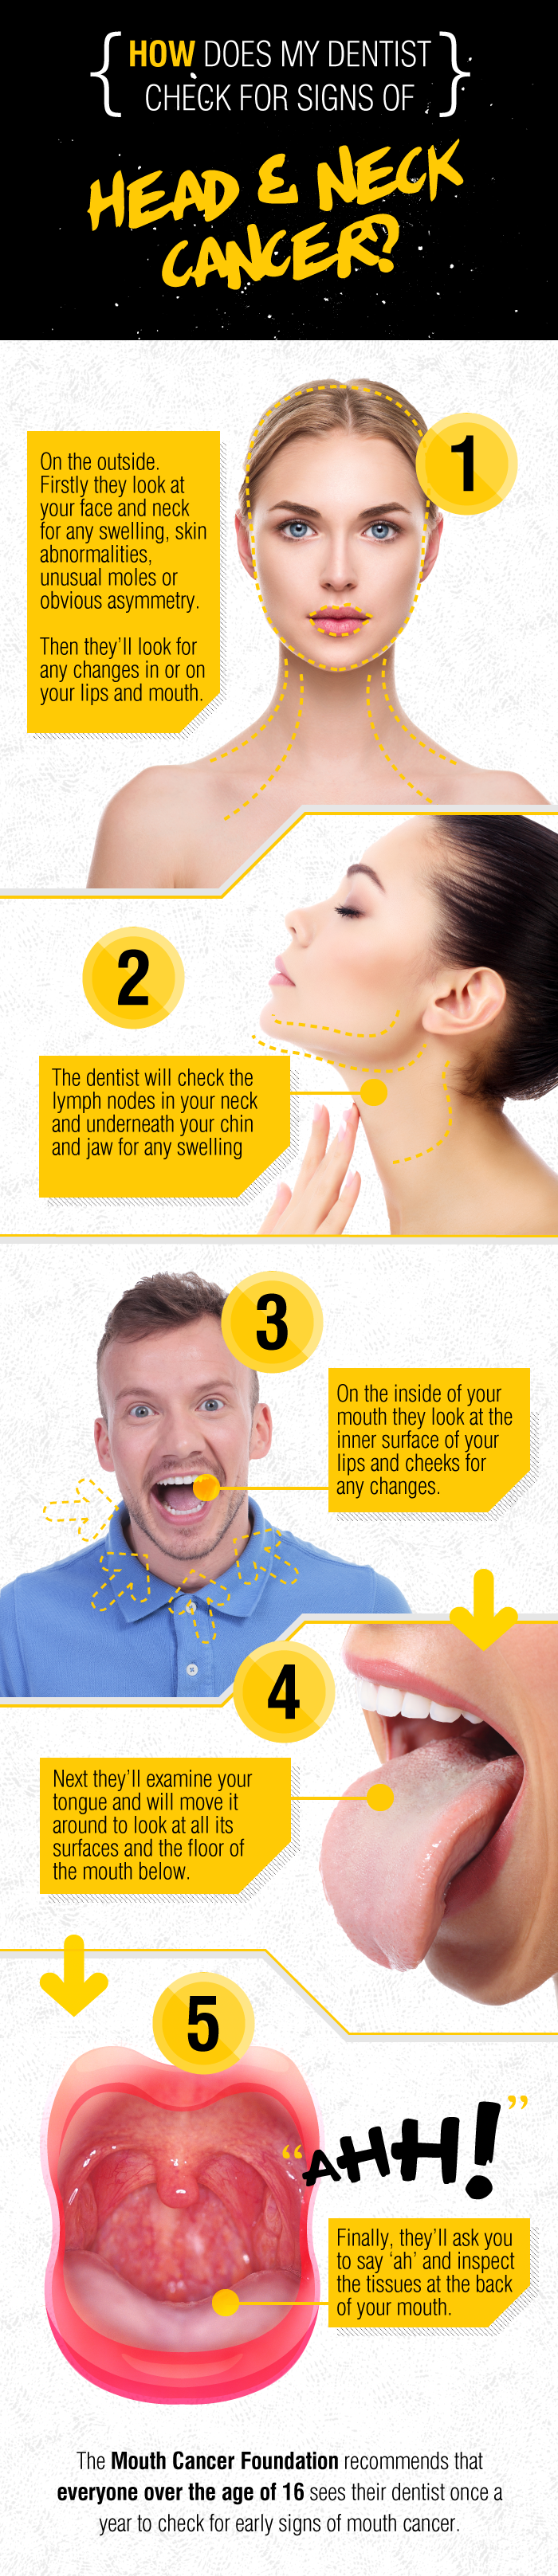 Mouth Cancer - Infographic